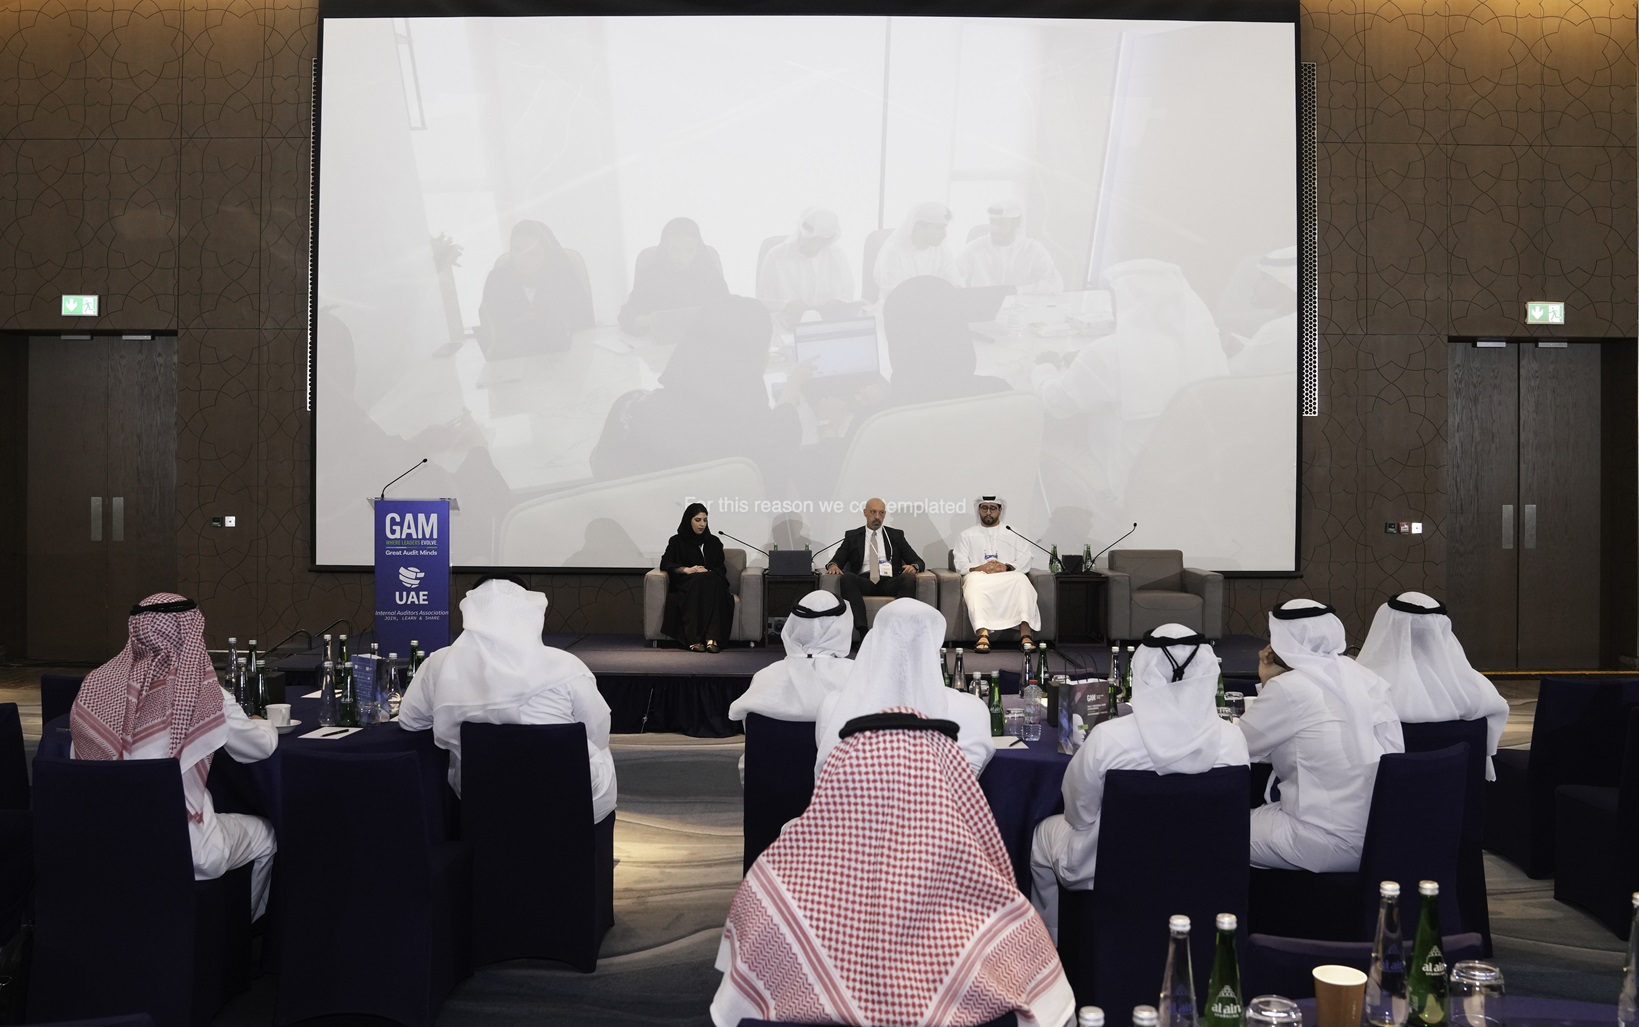 Abu Dhabi Accountability Authority showcases Al Mersad at the 1st Regional Great Audit Minds (GAM) Conference